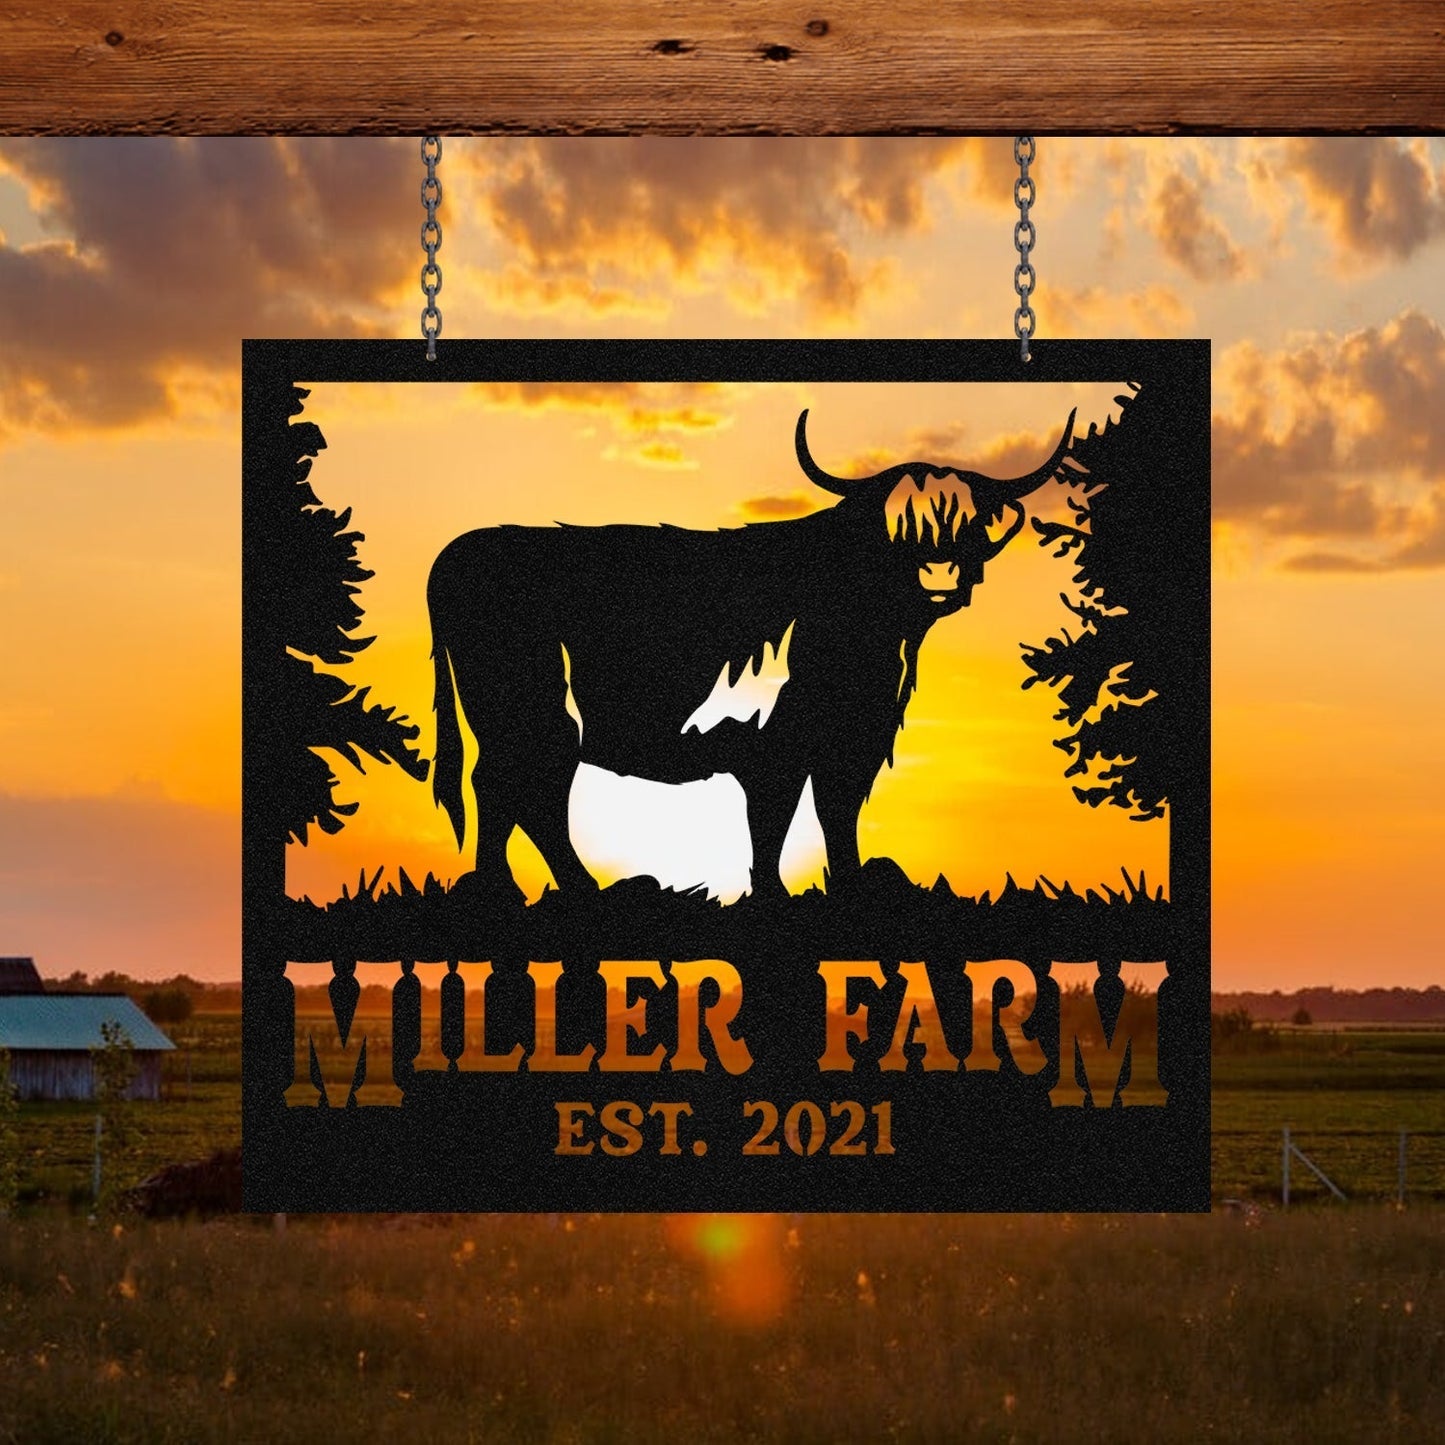 Personalized Metal Farm Sign Highland Cattle Cow Monogram Custom Outdoor Farmhouse Ranch Front Gate Wall Decor Art Gift